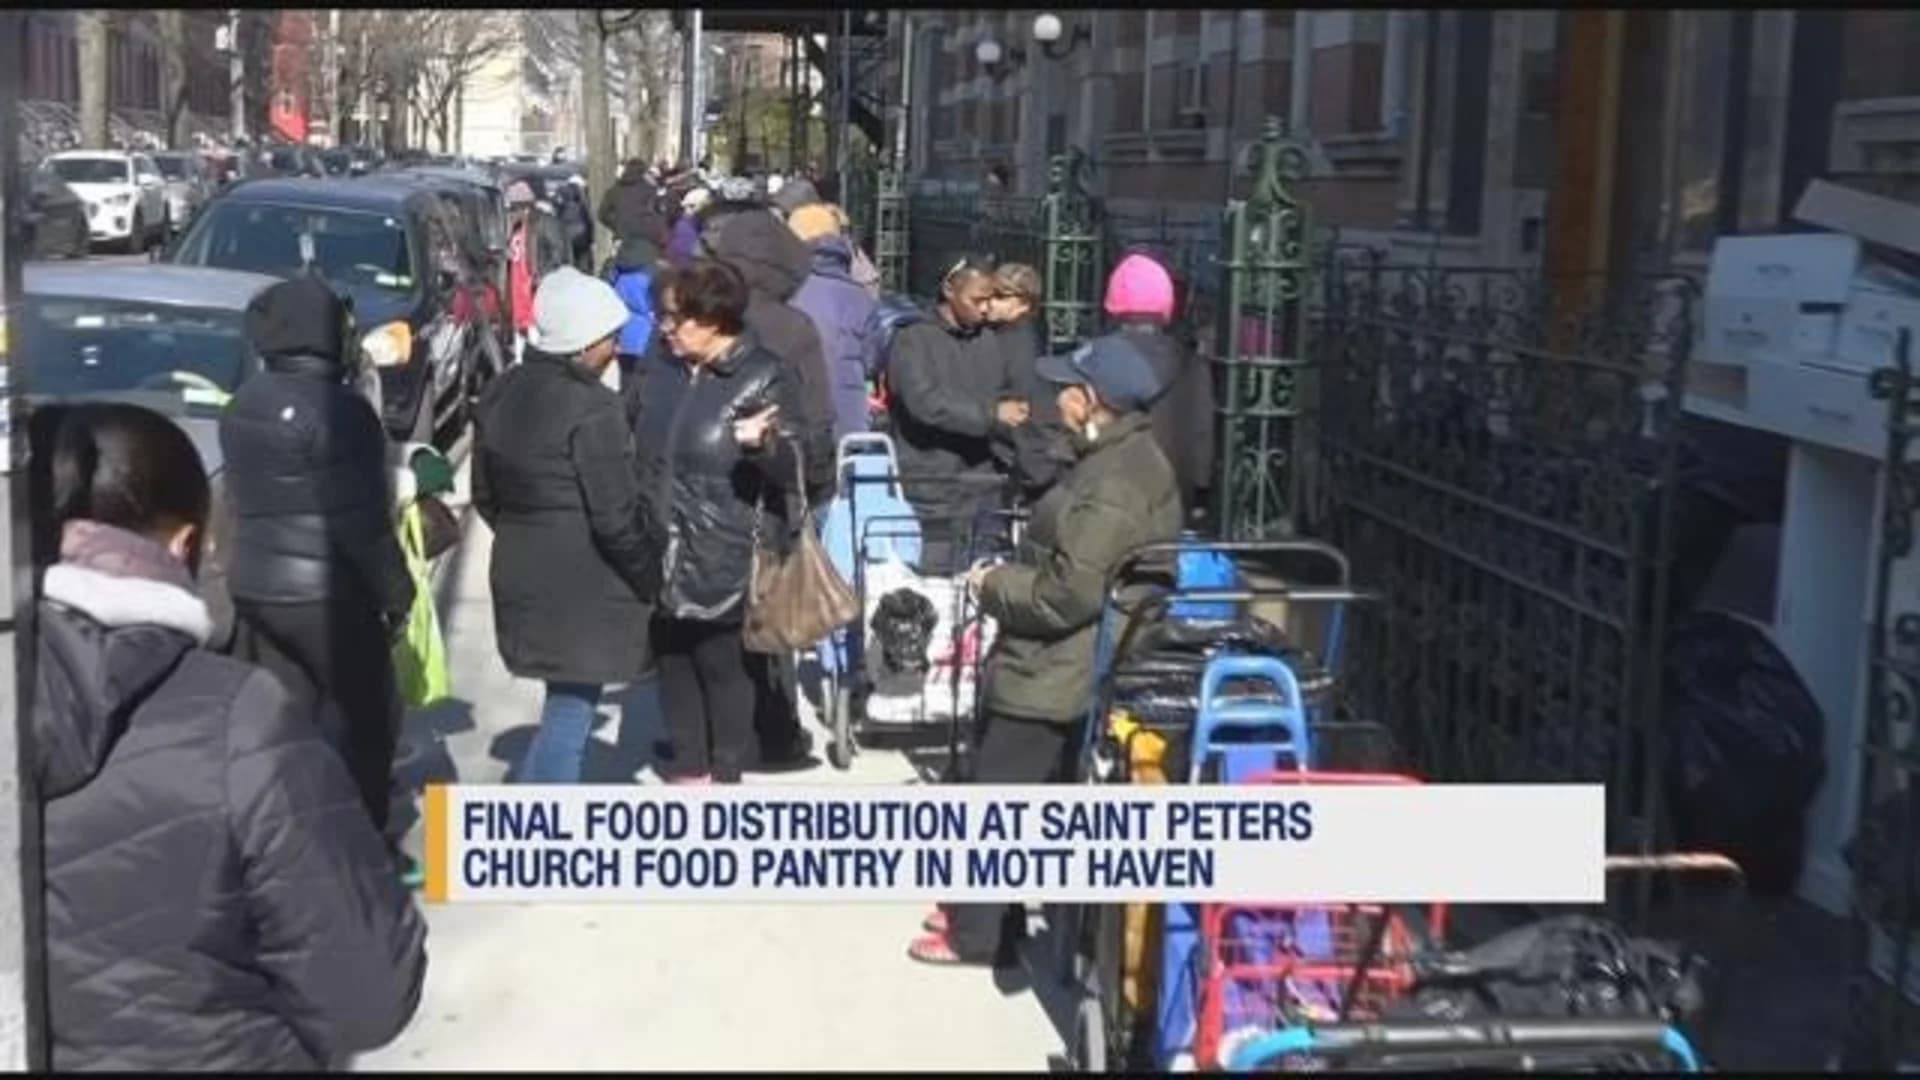 St. Peter's Food Pantry closes in Mott Haven